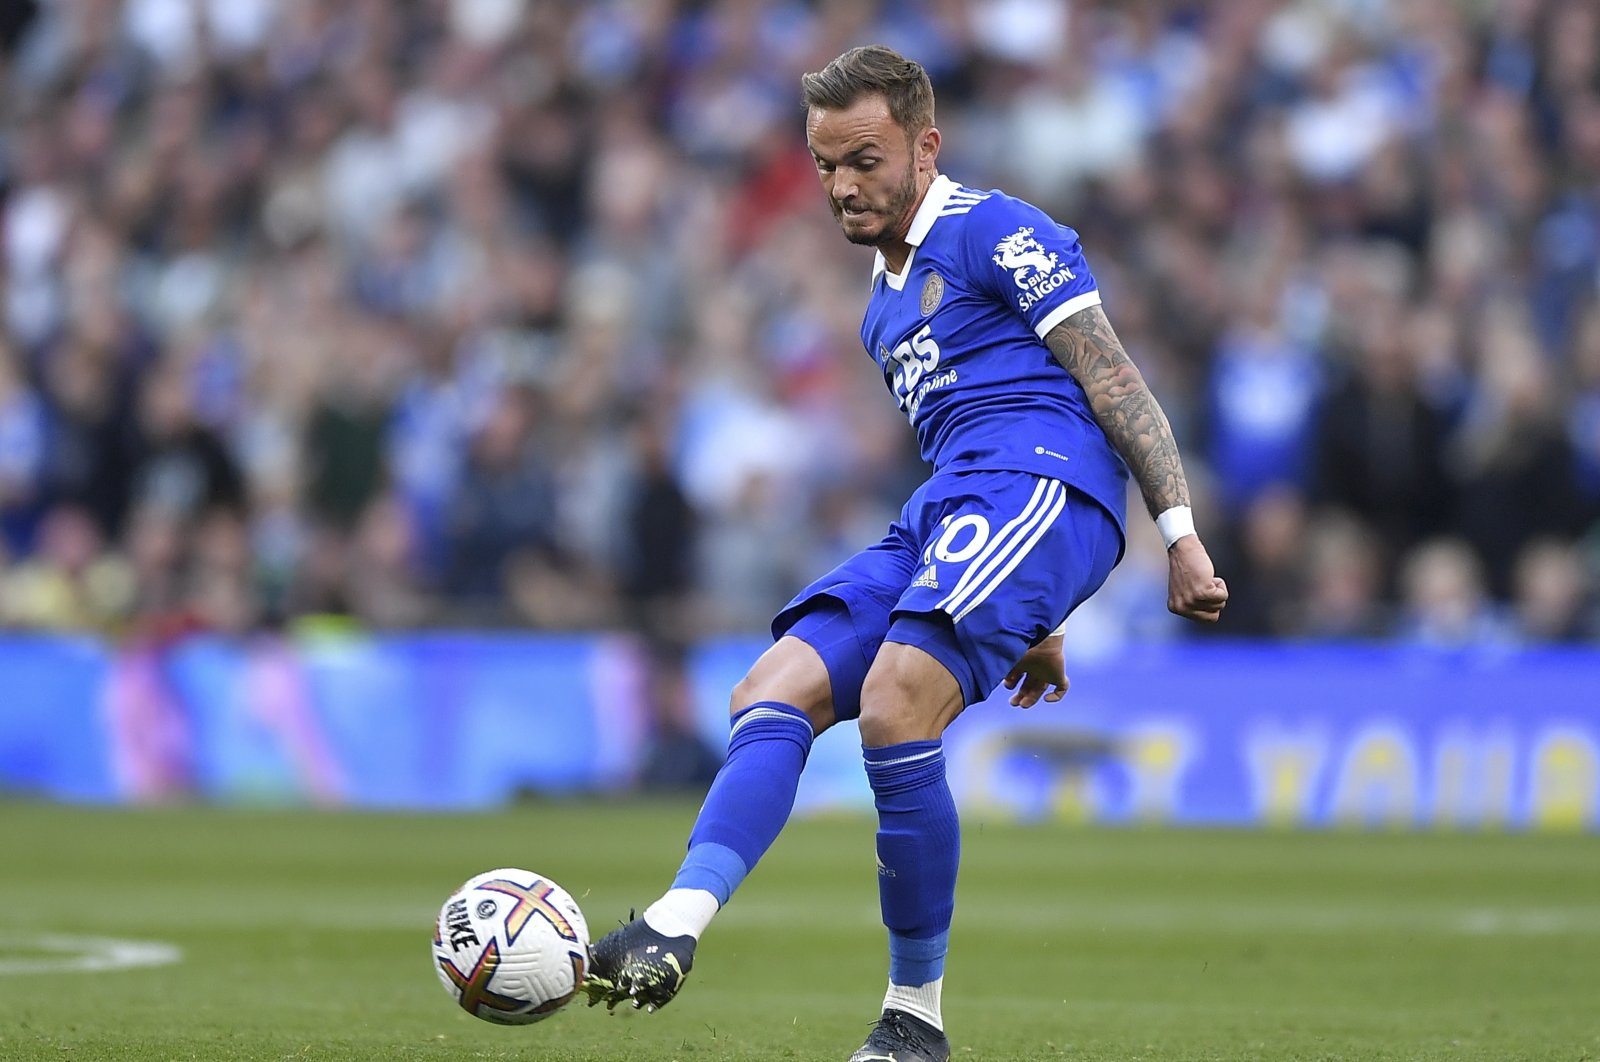 Leicester&#039;s James Maddison in action during the English Premier League football match between Tottenham Hotspur and Leicester City in London, Britain, Sept. 17, 2022. (EPA Photo)